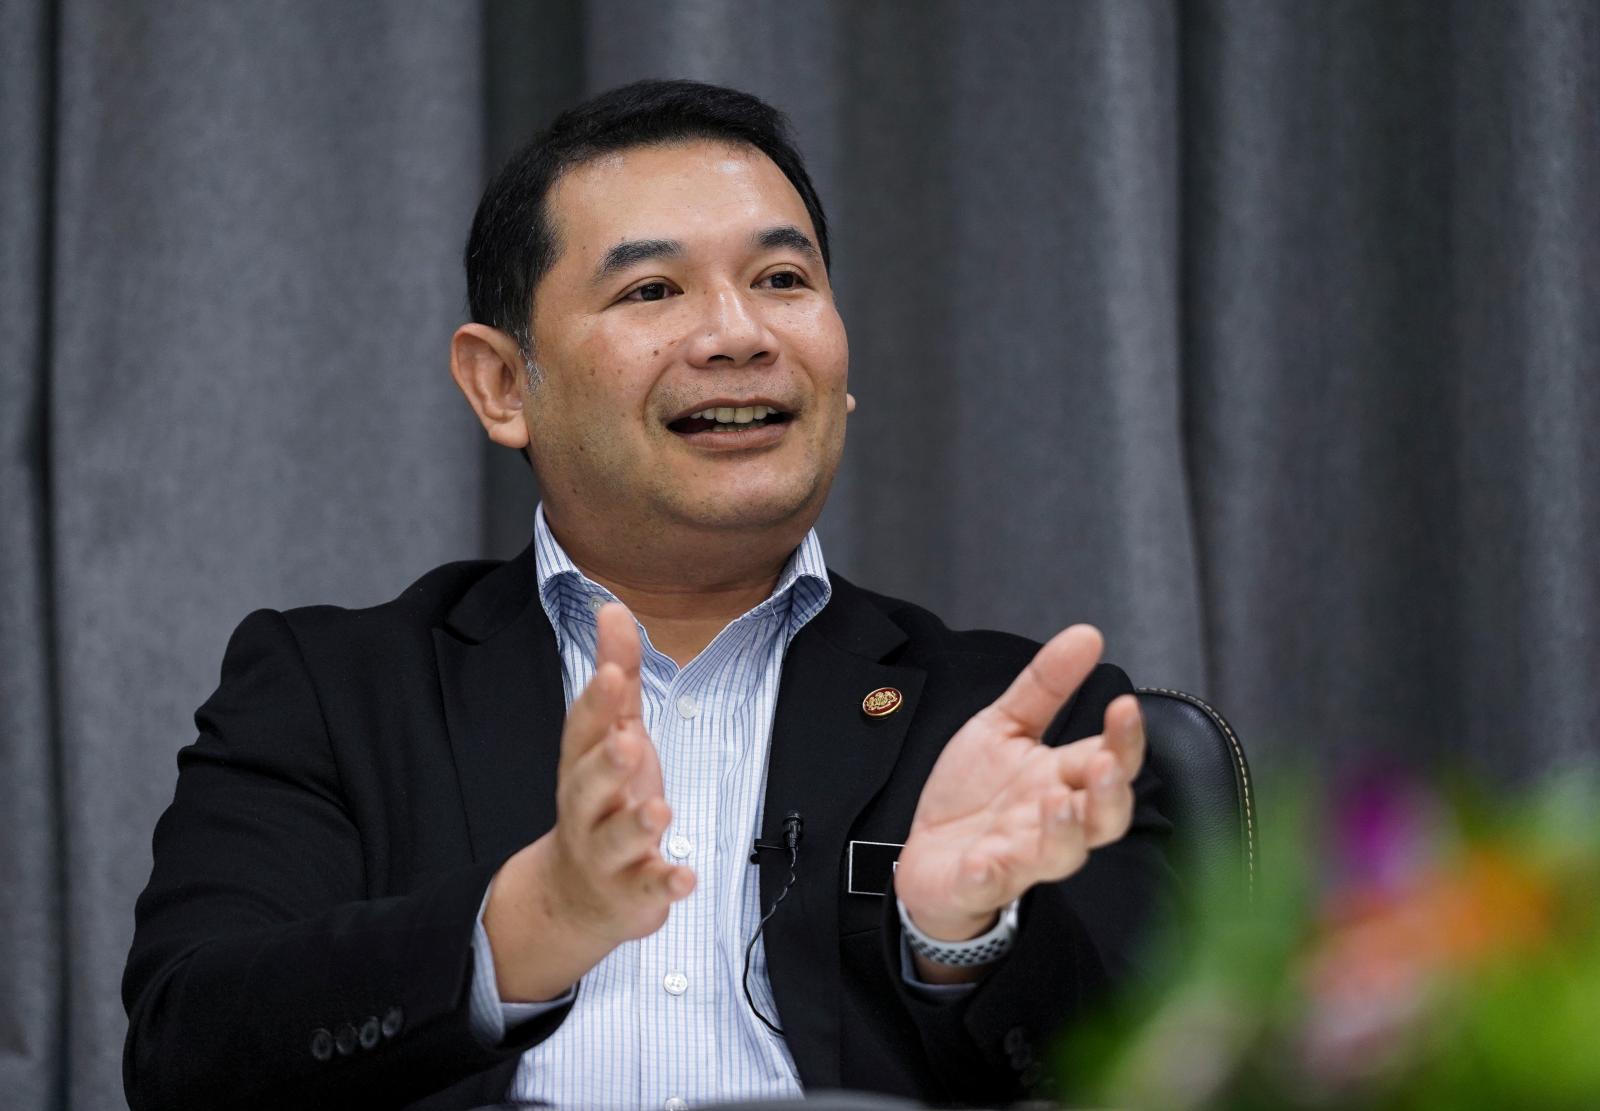 M'sian minister says employers no longer focus on degrees in hiring process  | weirdkaya